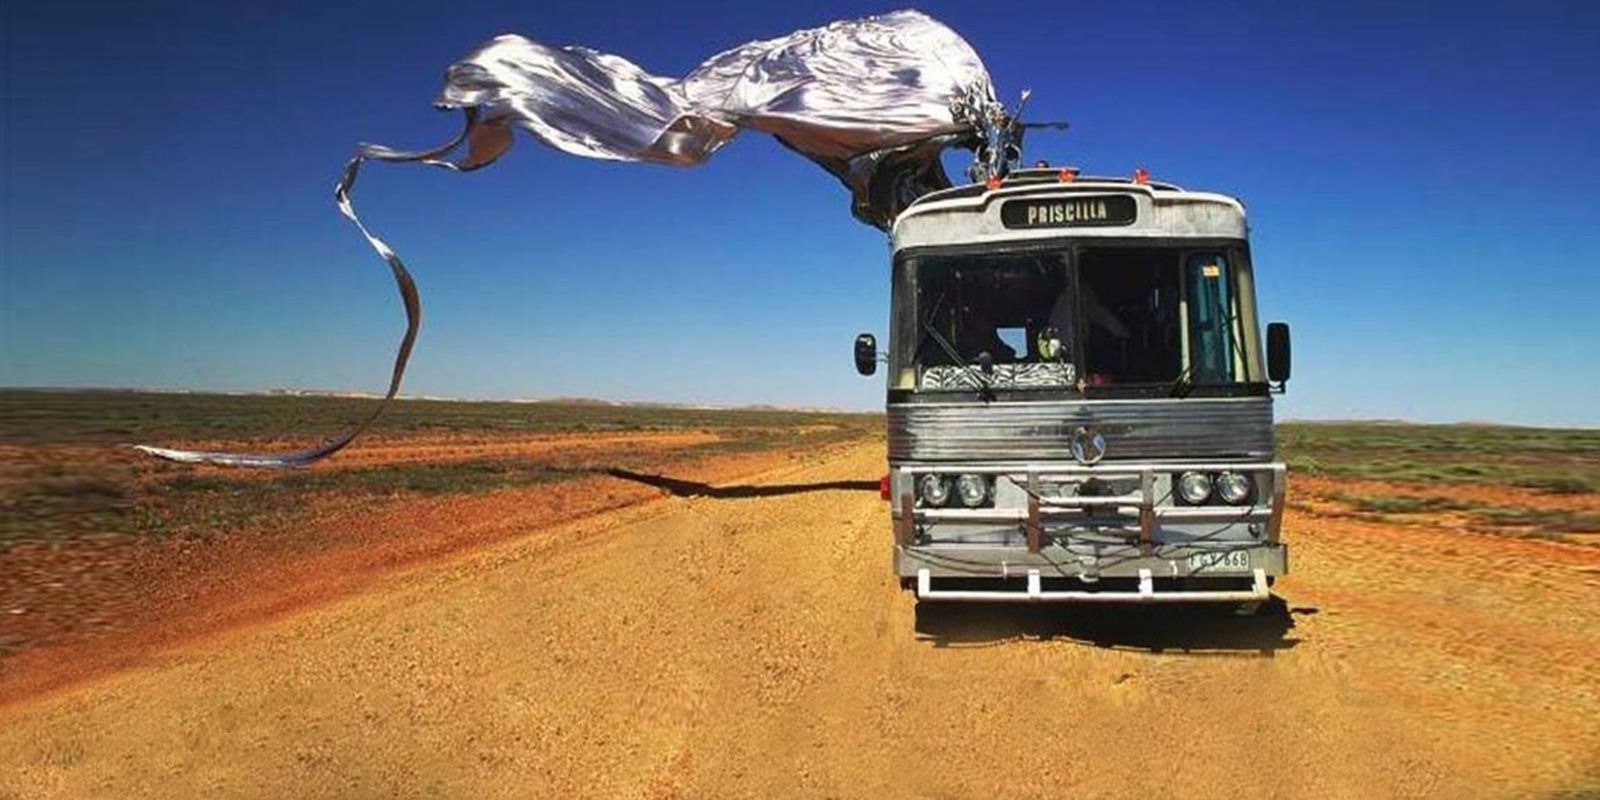 The Adventures of Priscilla, Queen of the Desert promo photo bus in the desert with silver banner on top